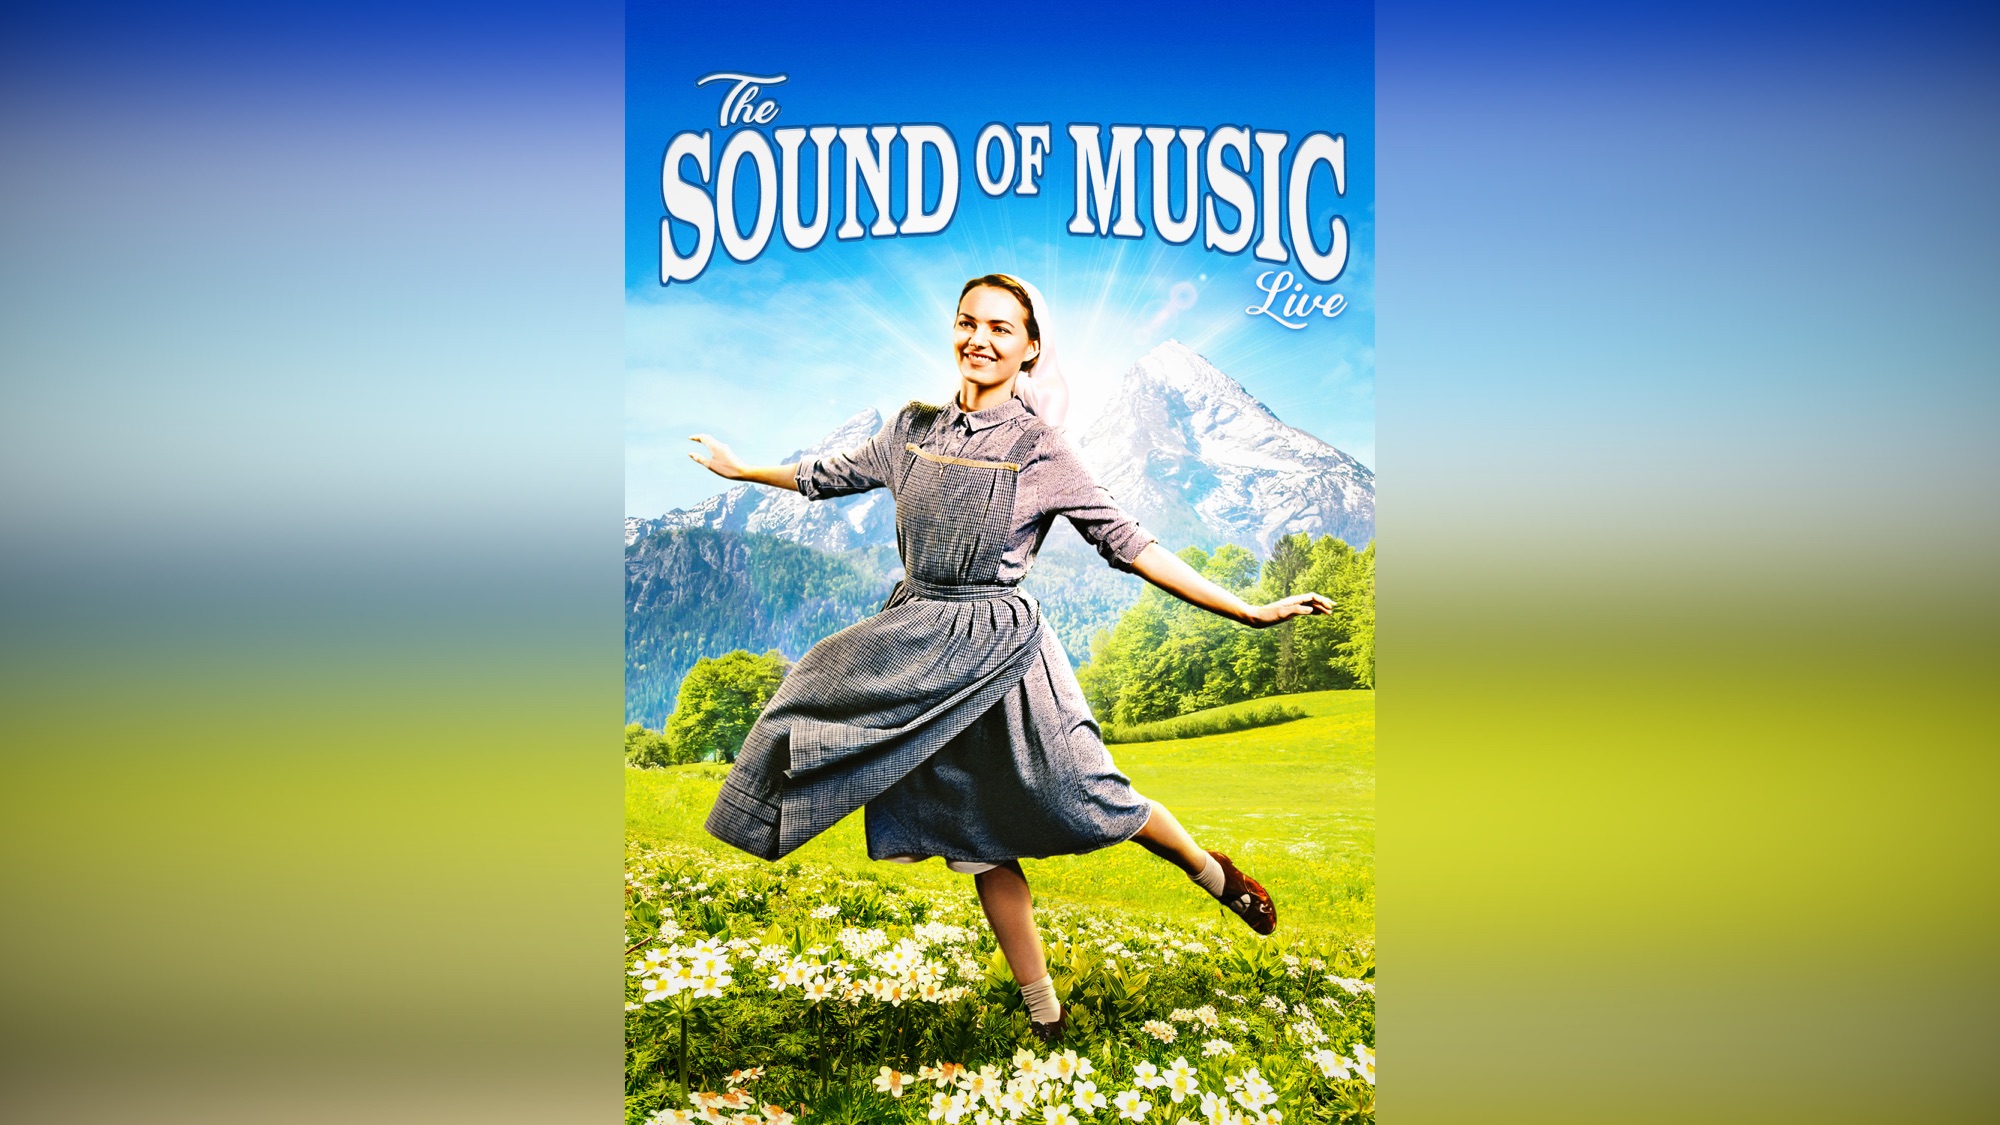 The Sound of Music Live Apple TV